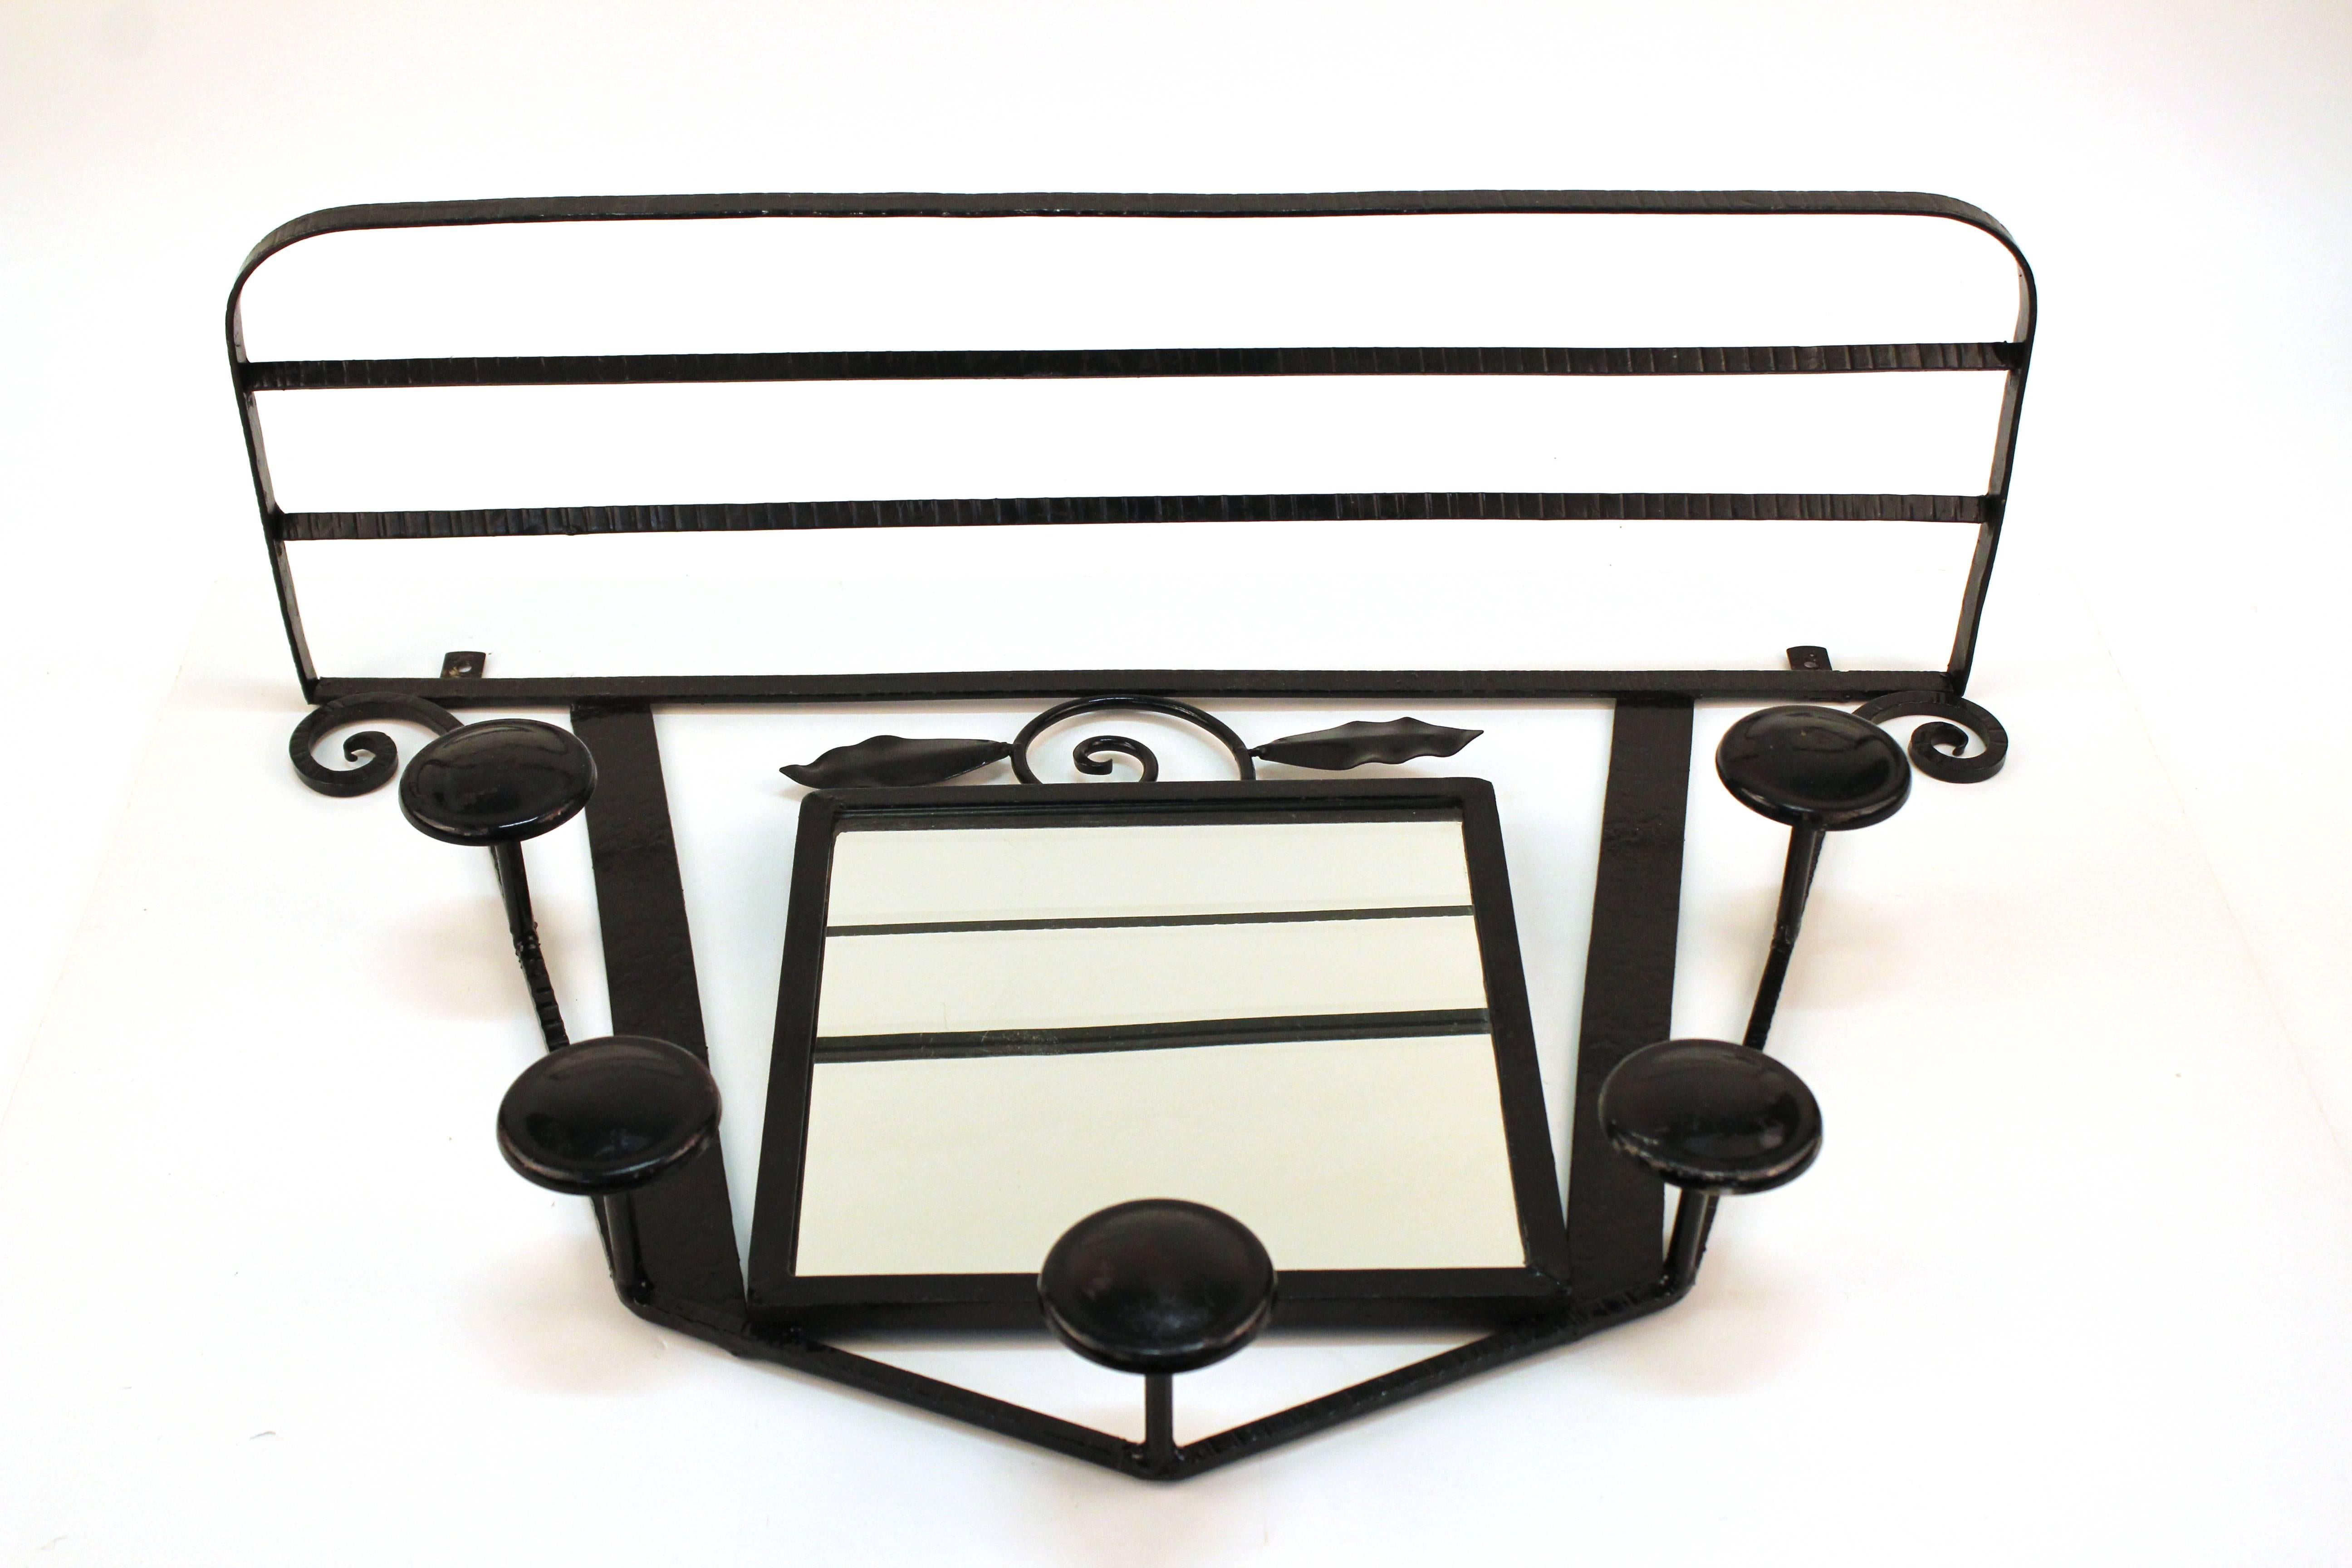 French Art Deco 1920s wall rack for hats or coats. Produced in hand wrought black iron. Includes shelf and mirror. In very good condition.